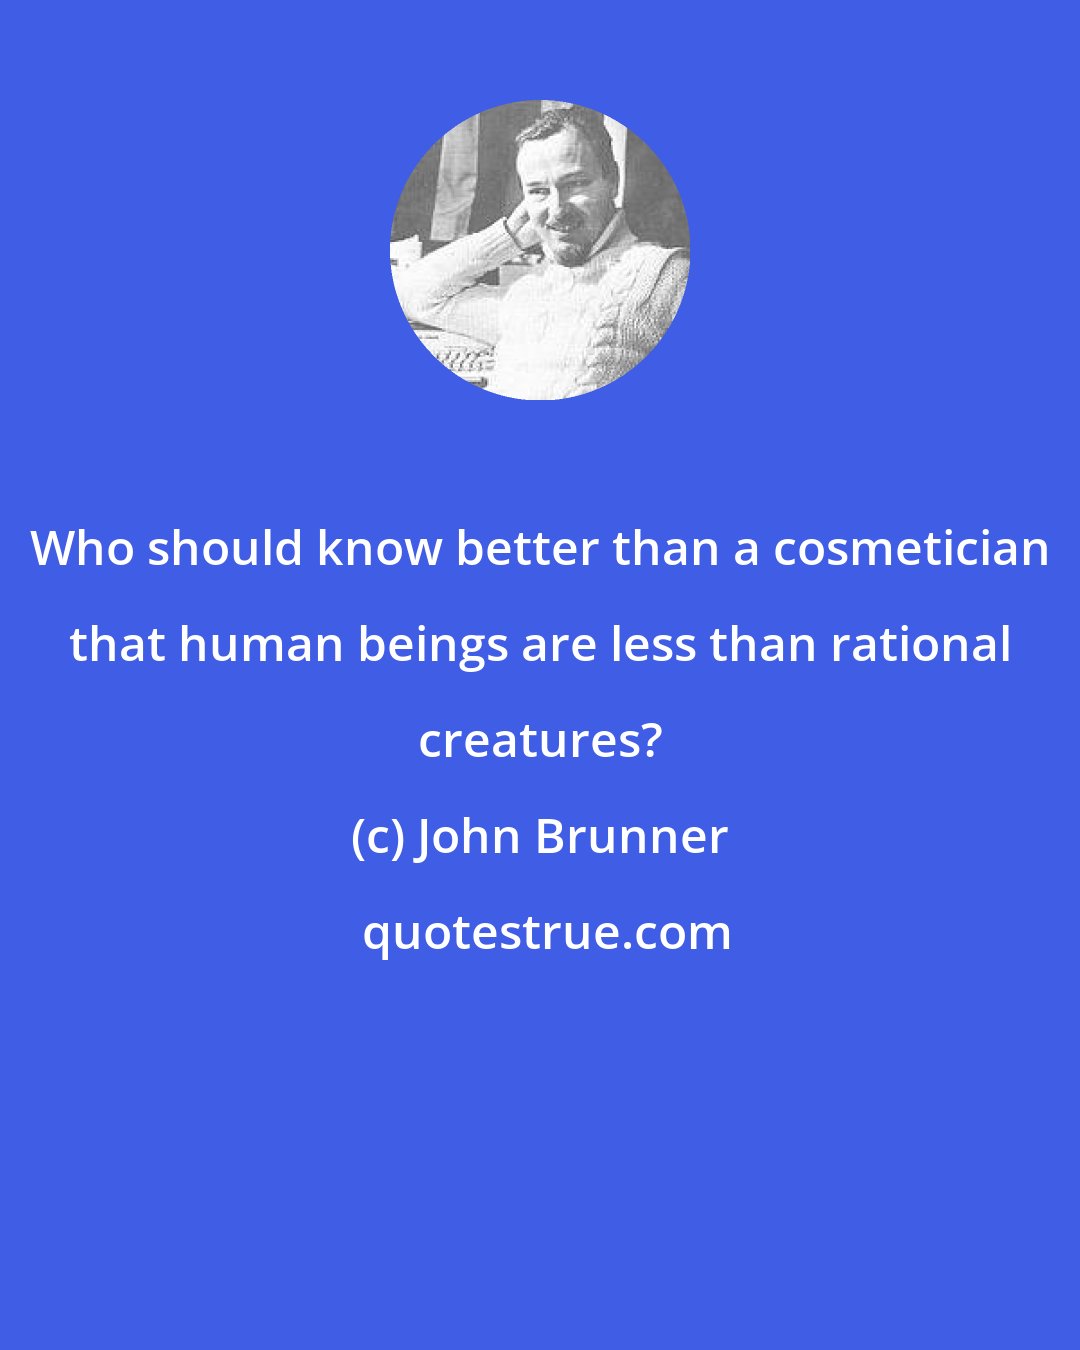 John Brunner: Who should know better than a cosmetician that human beings are less than rational creatures?